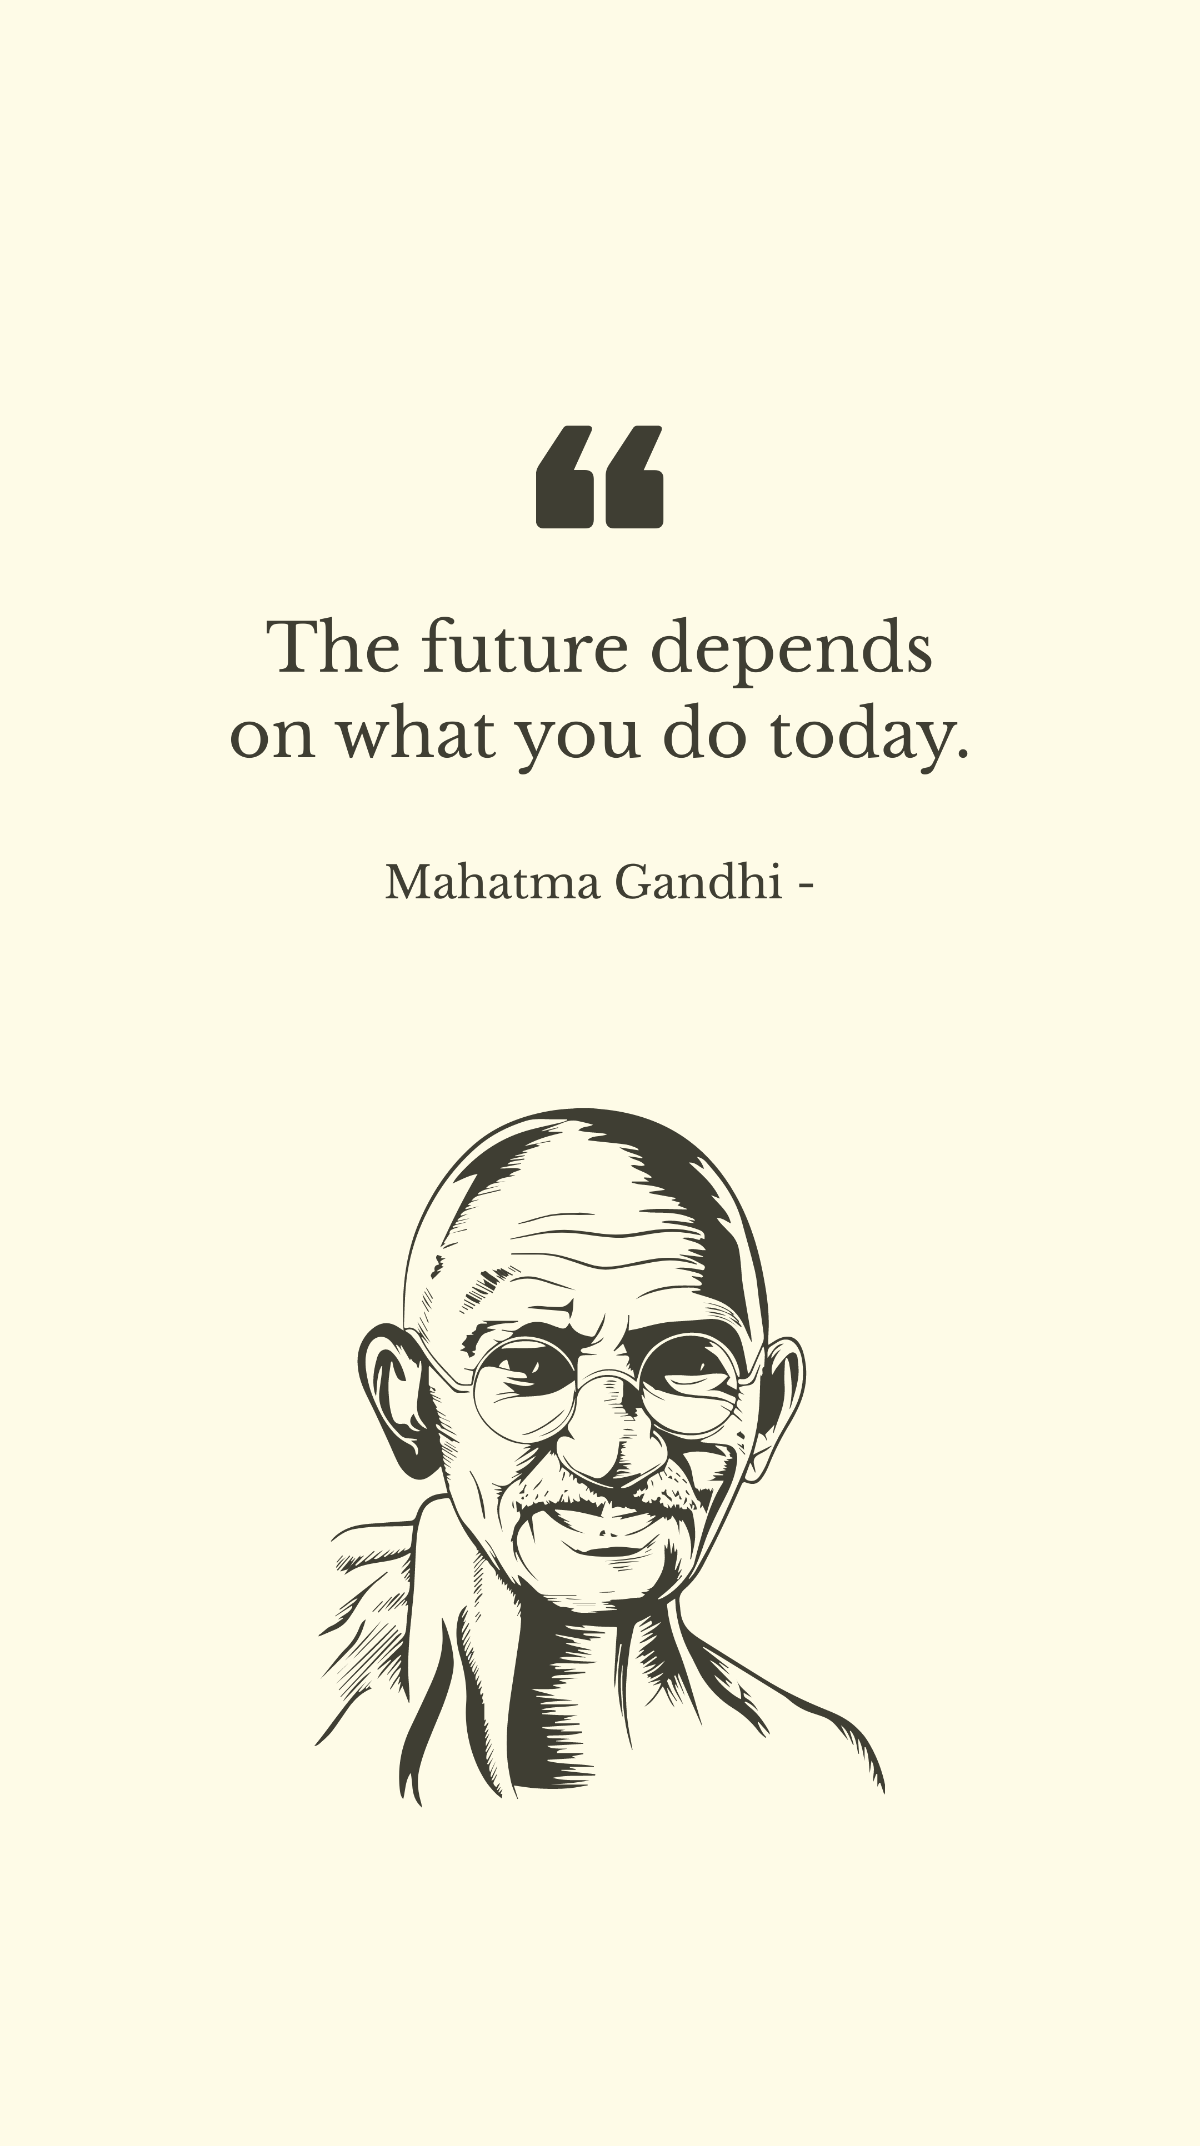 Mahatma Gandhi - The future depends on what you do today.